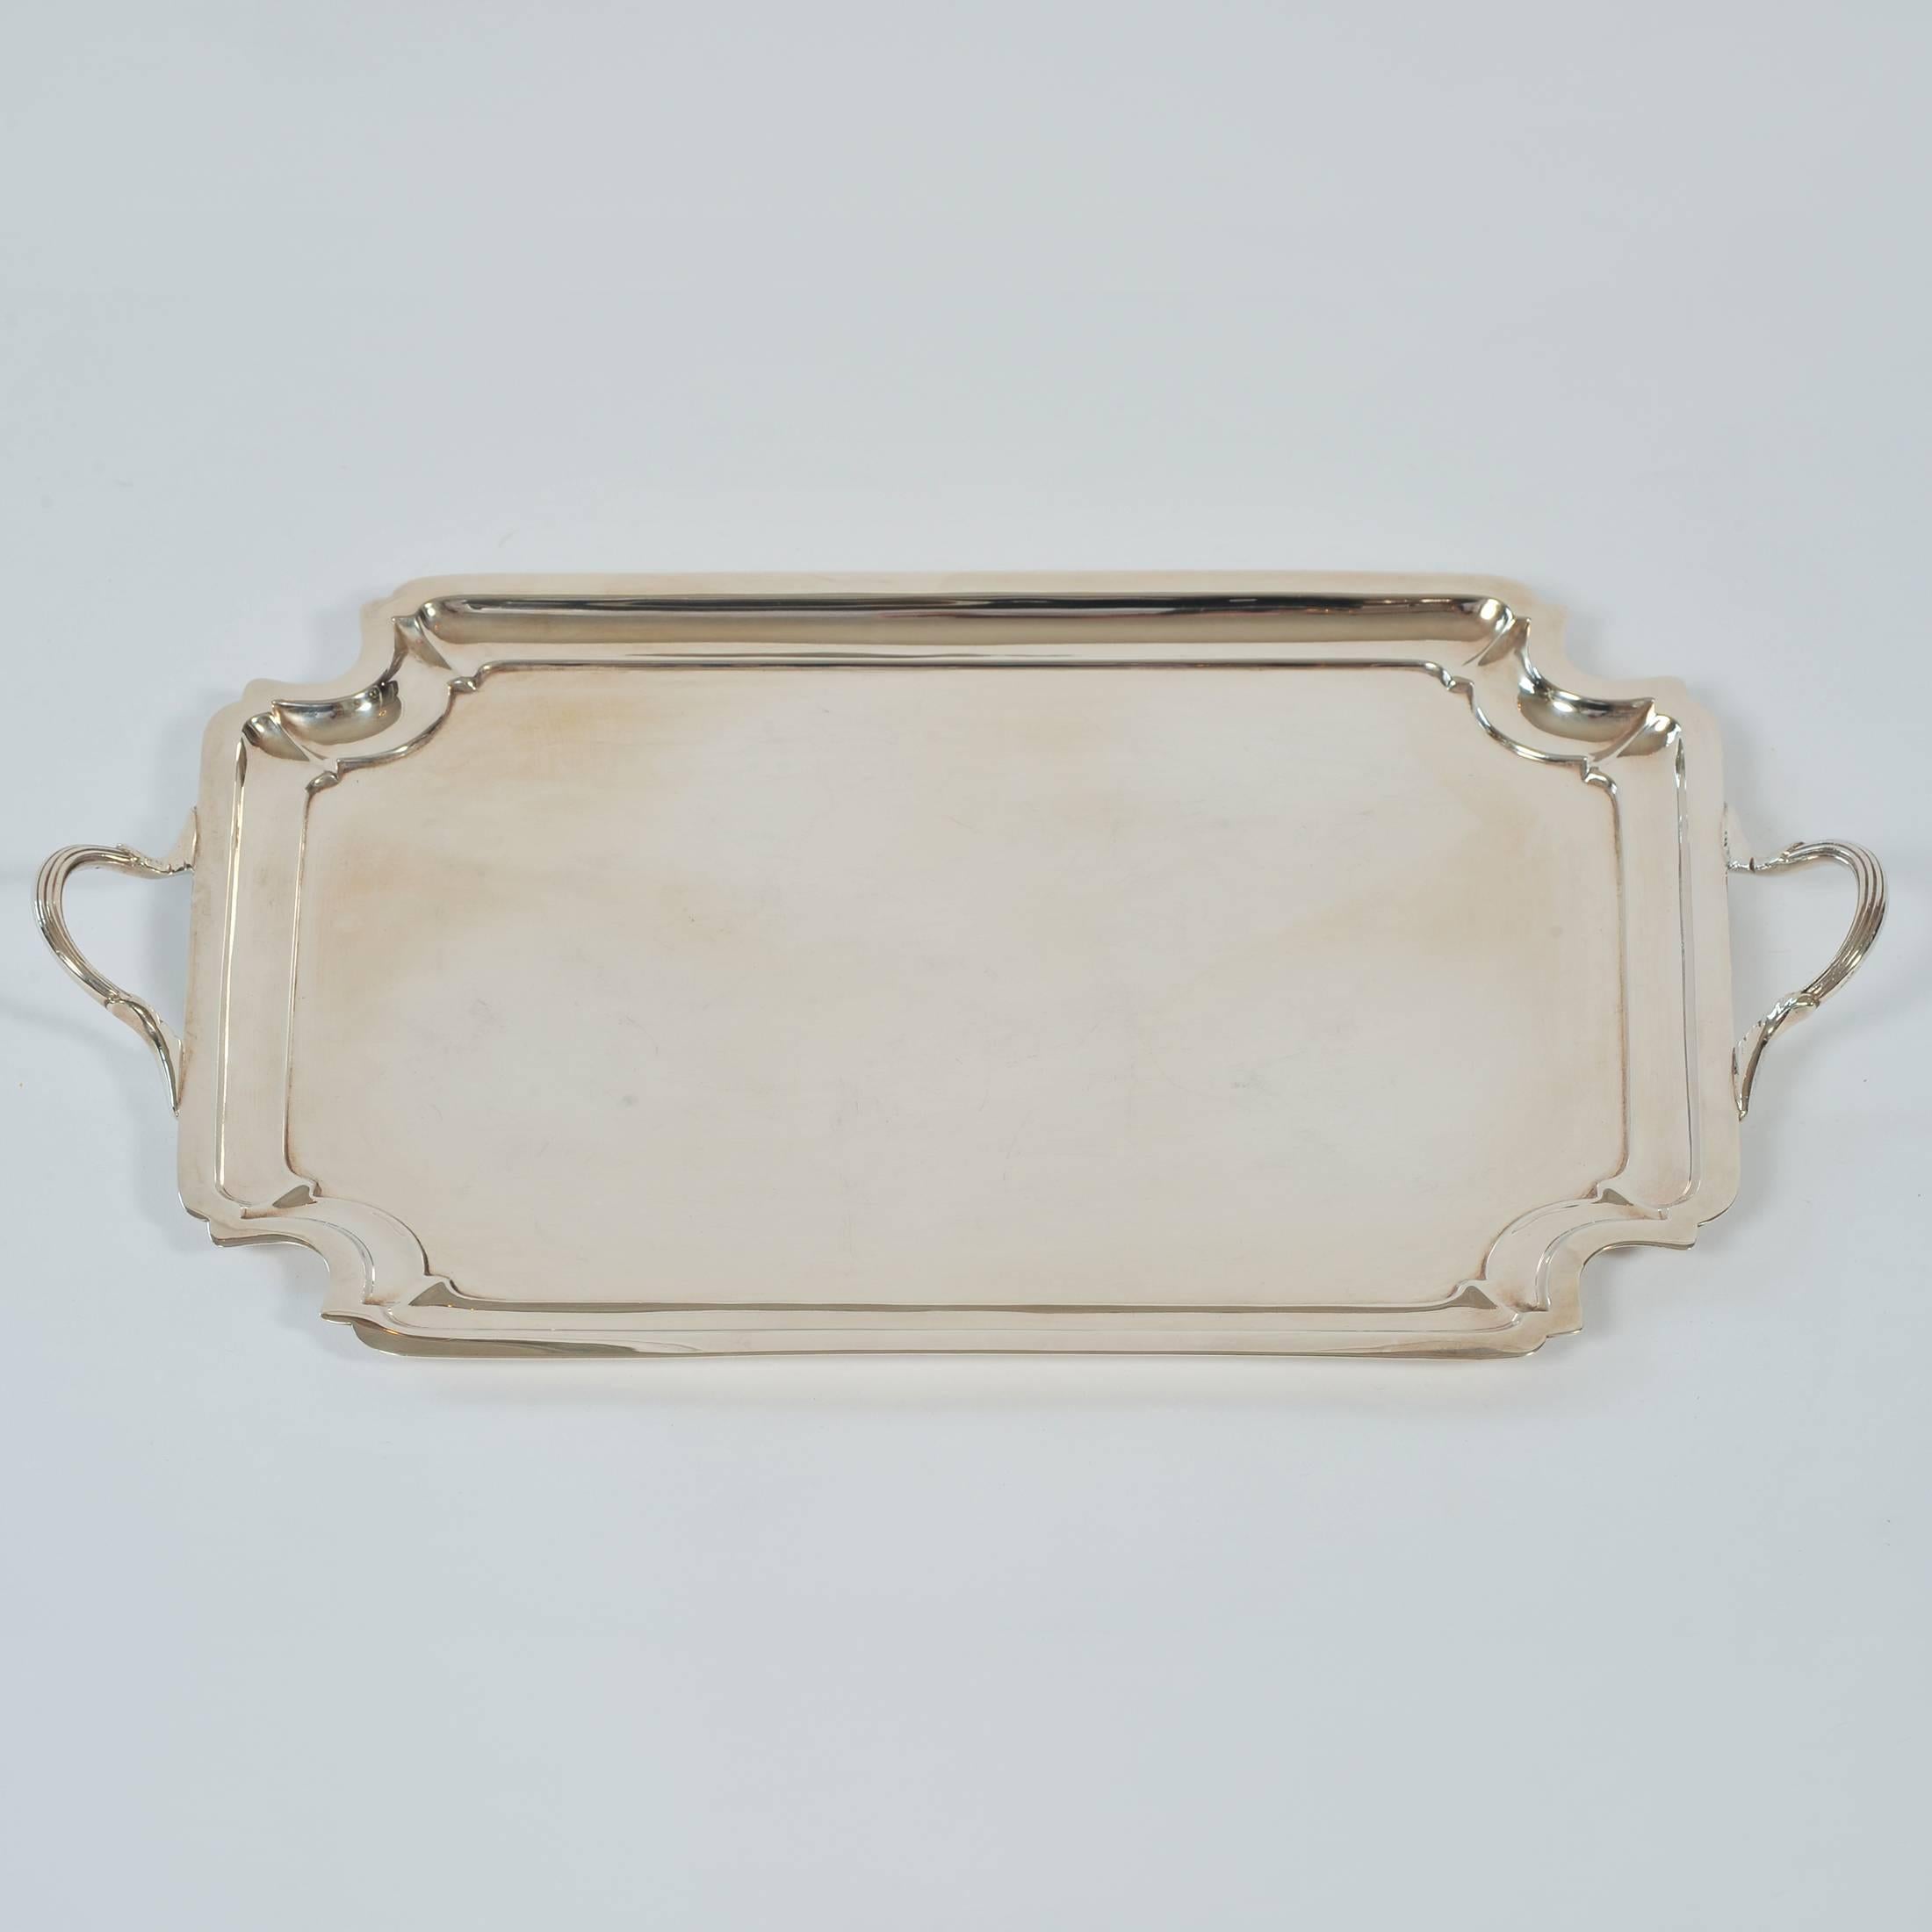 Elegant two-handled silver plate tray with simple stepped borders, stamped 'Edward & Sons, Glasgow'.